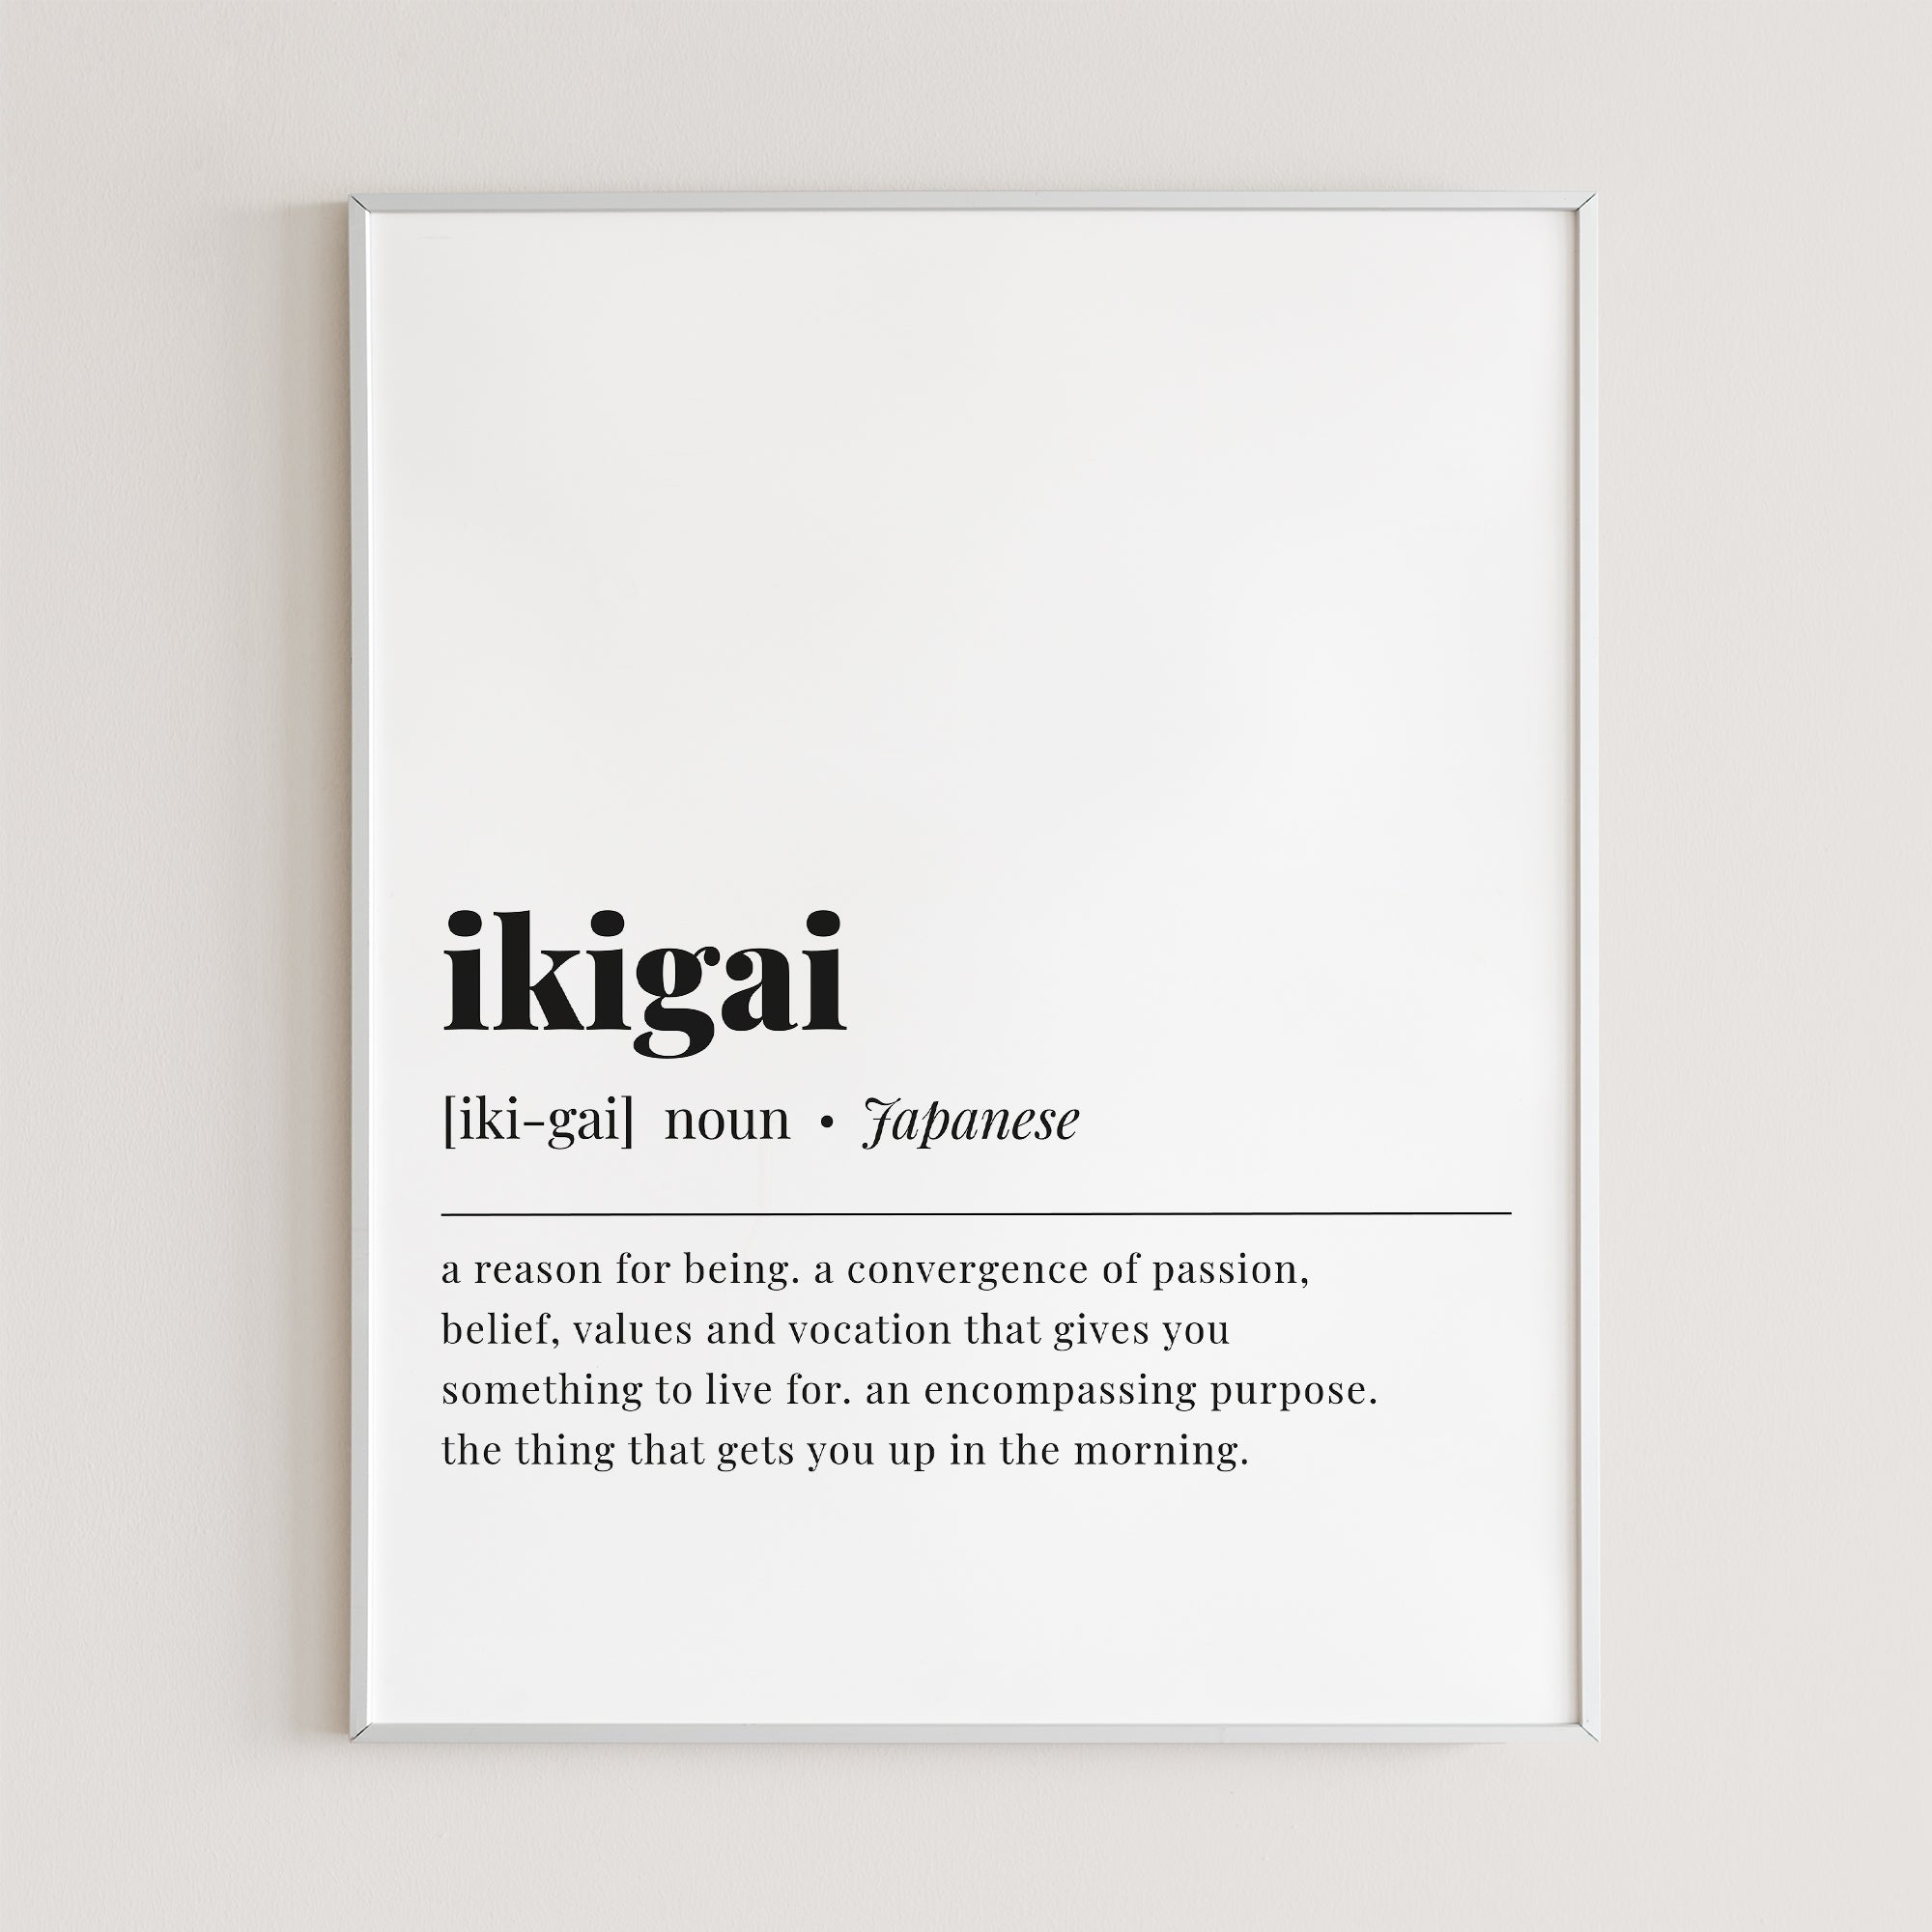 Ikigai Definition Print Instant Download by LittleSizzle